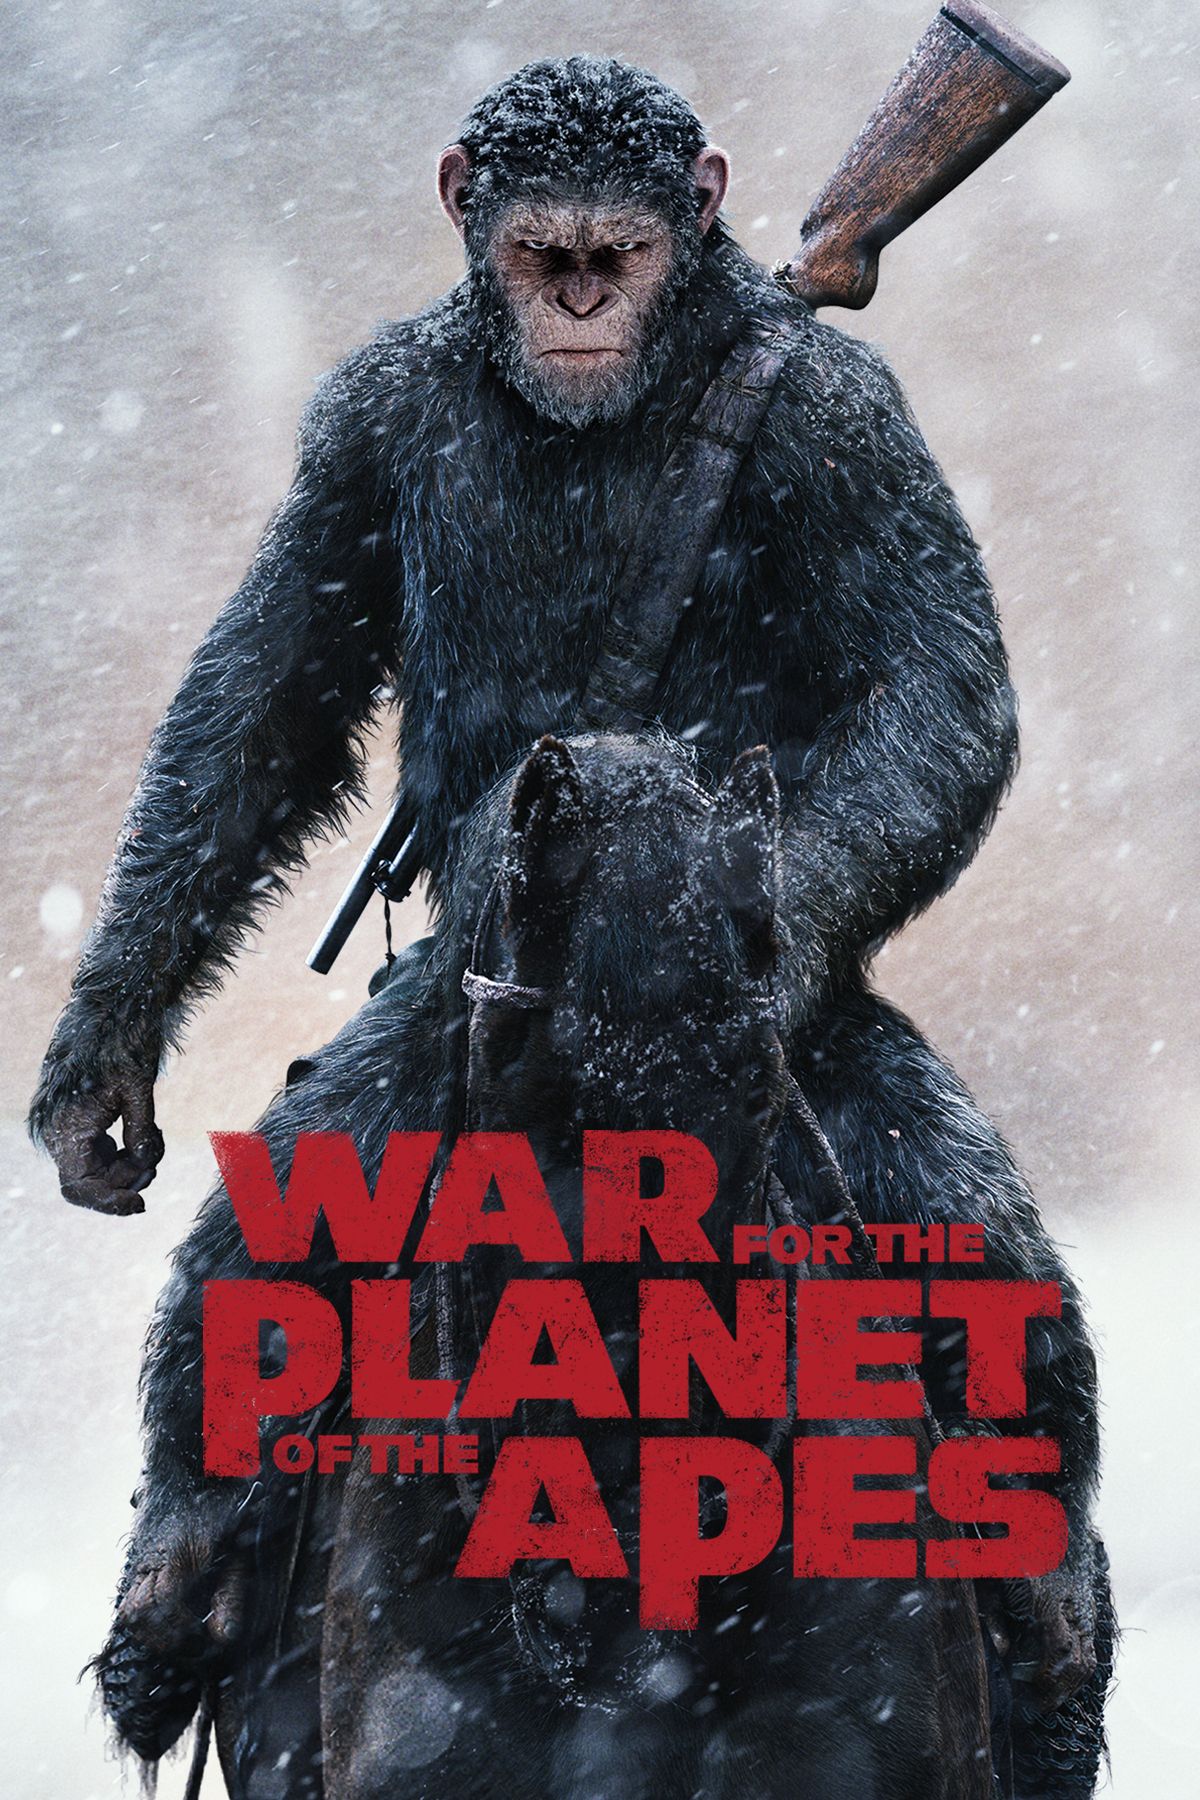 War of the planet of the apes online for free